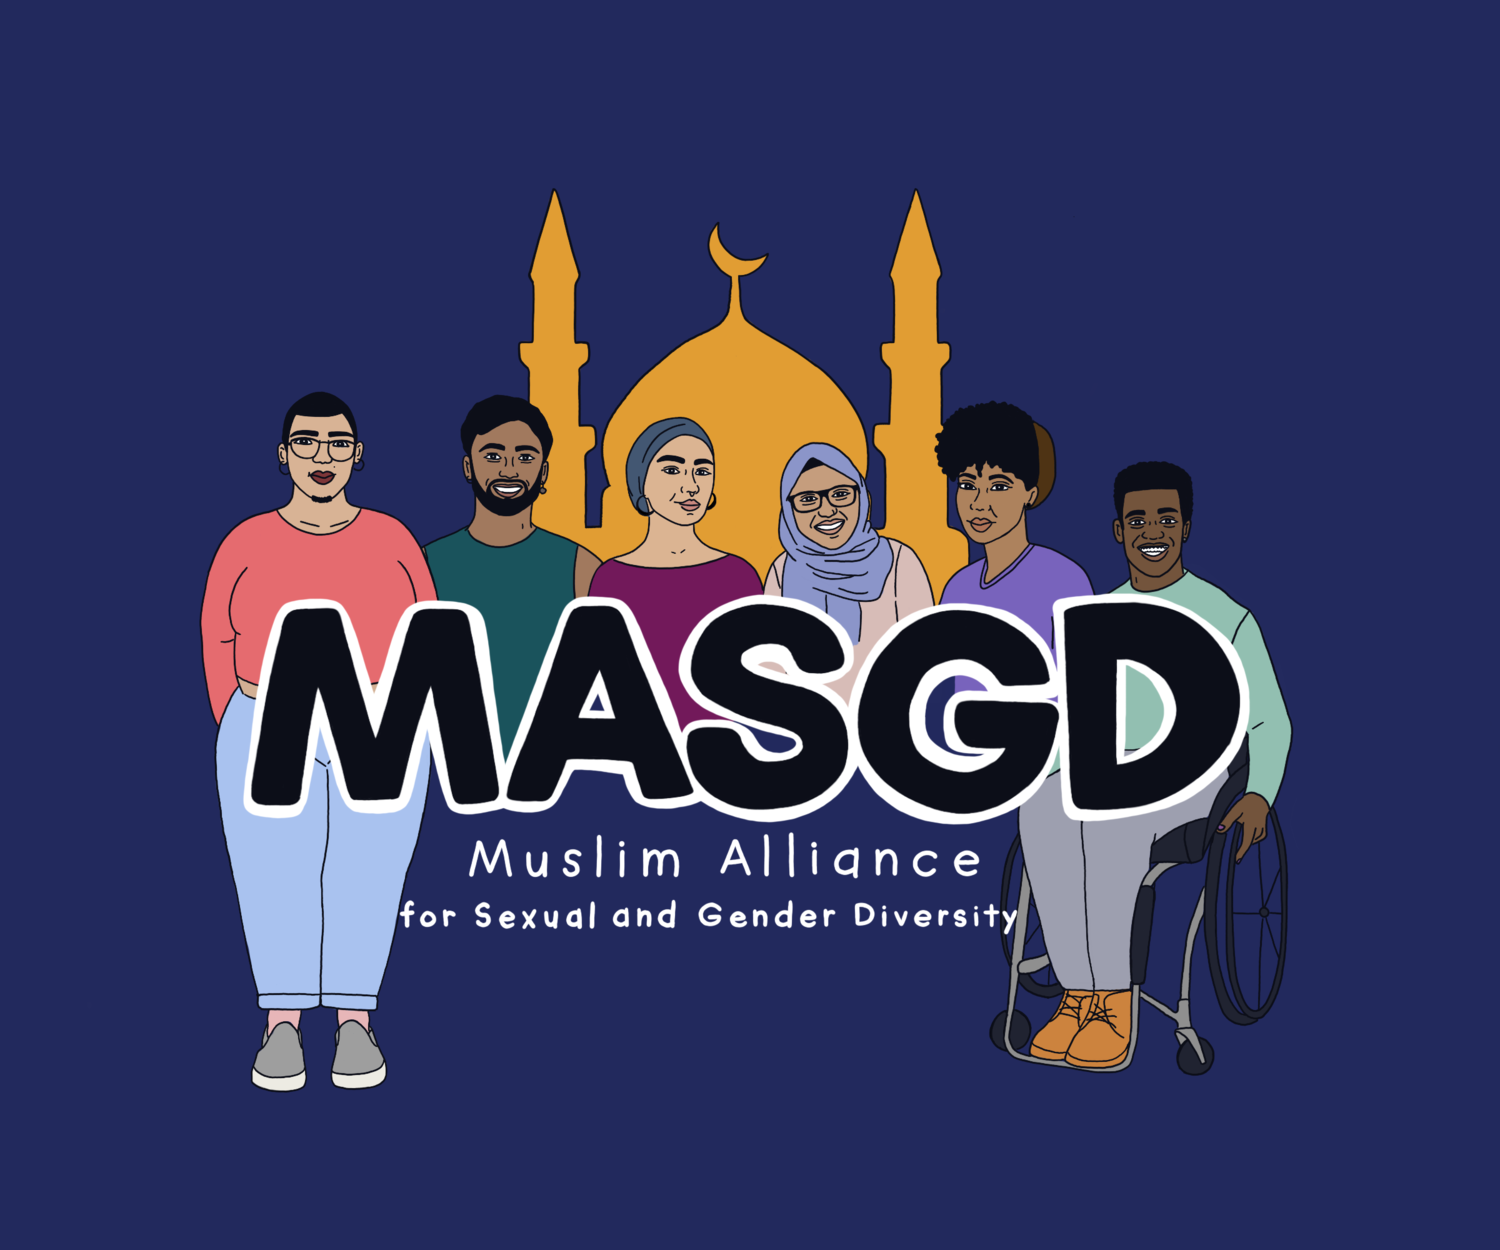 www.themasgd.org